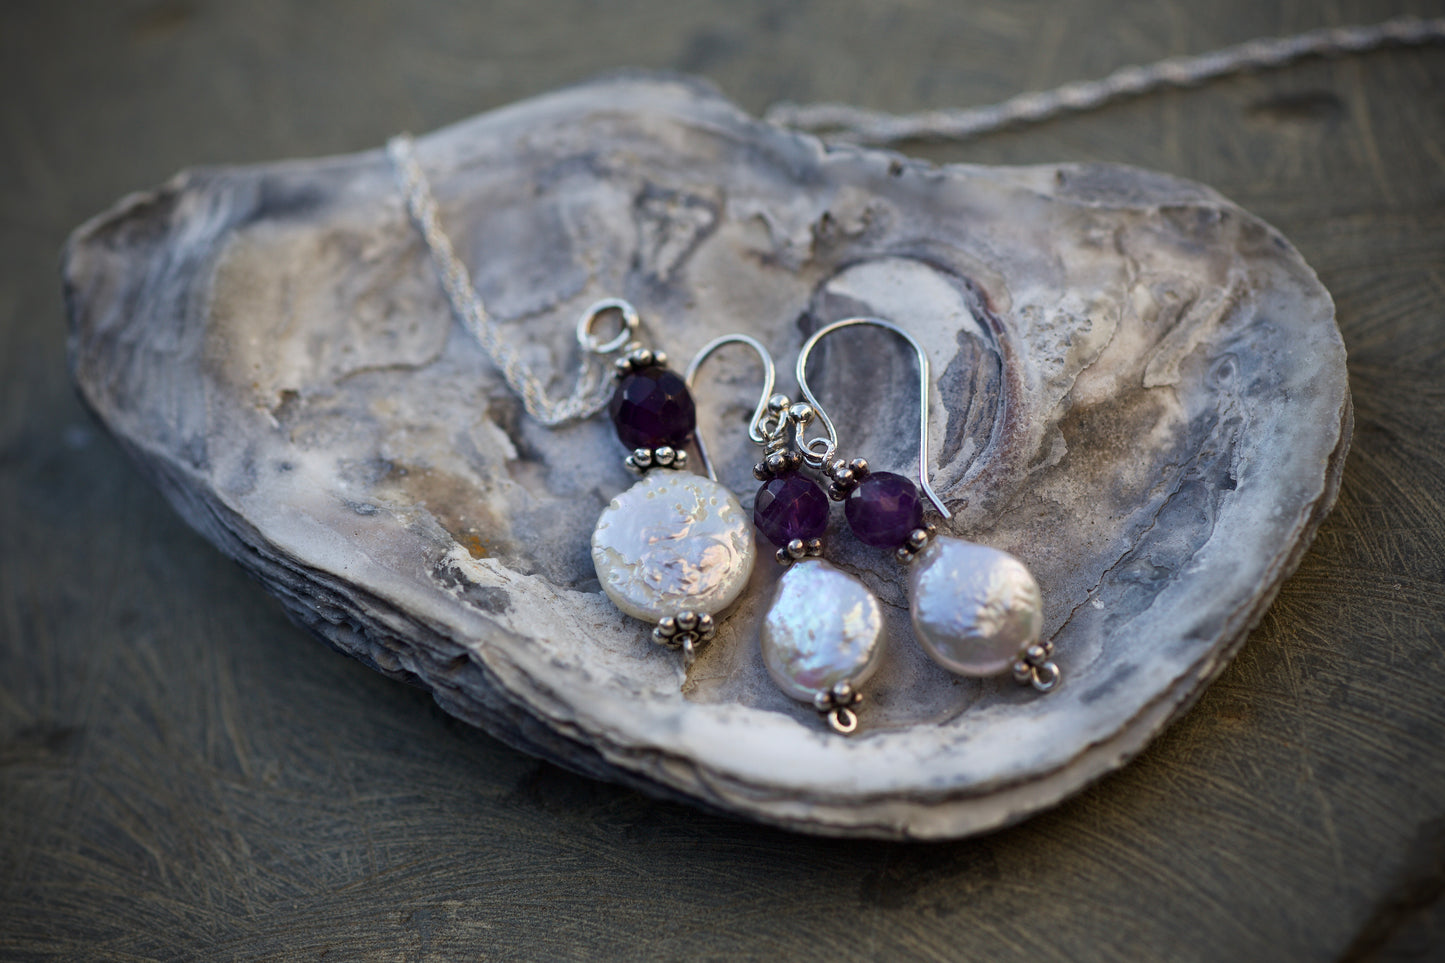 Amethyst, White Coin Pearl, and Sterling Silver Earrings and Pendant / Necklace Set